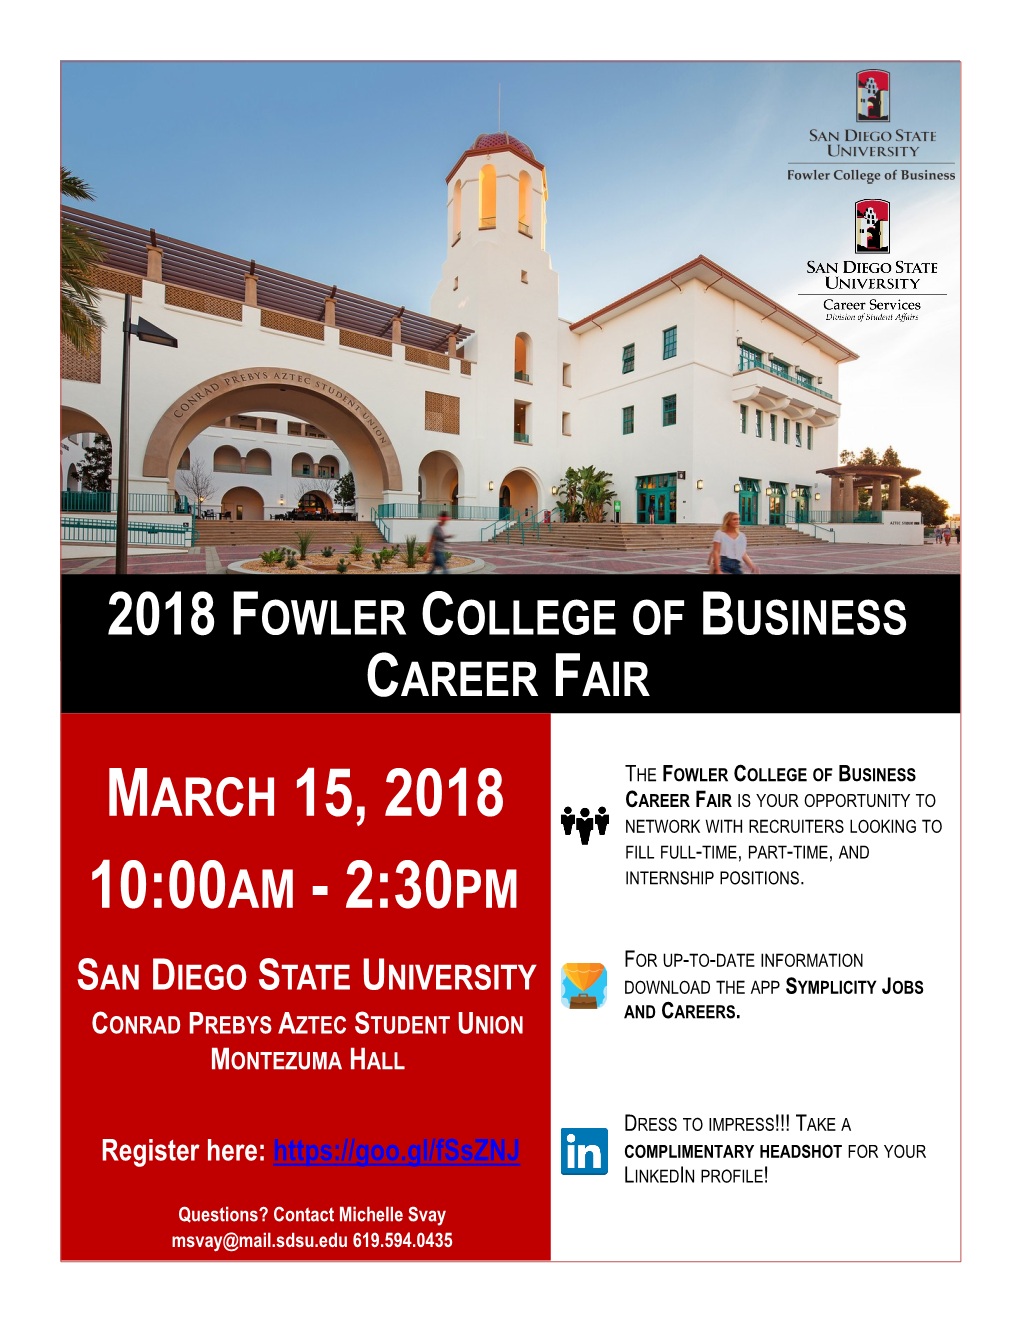 Fowler College of Business Career Fair 2018 / Employers